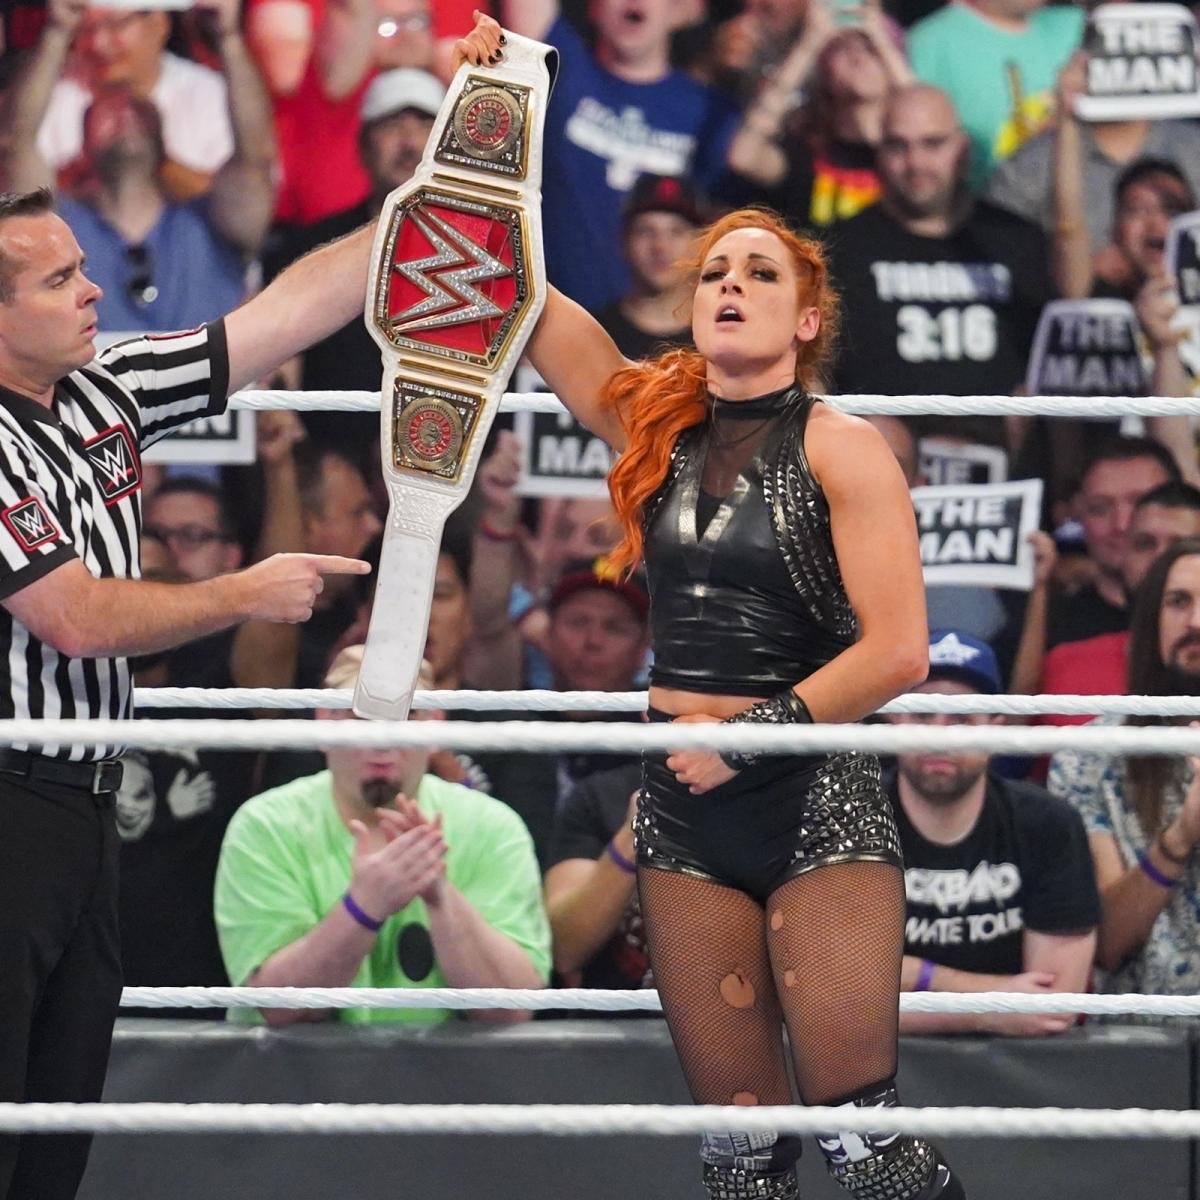 Day 153 of missing Becky Lynch from our screens!